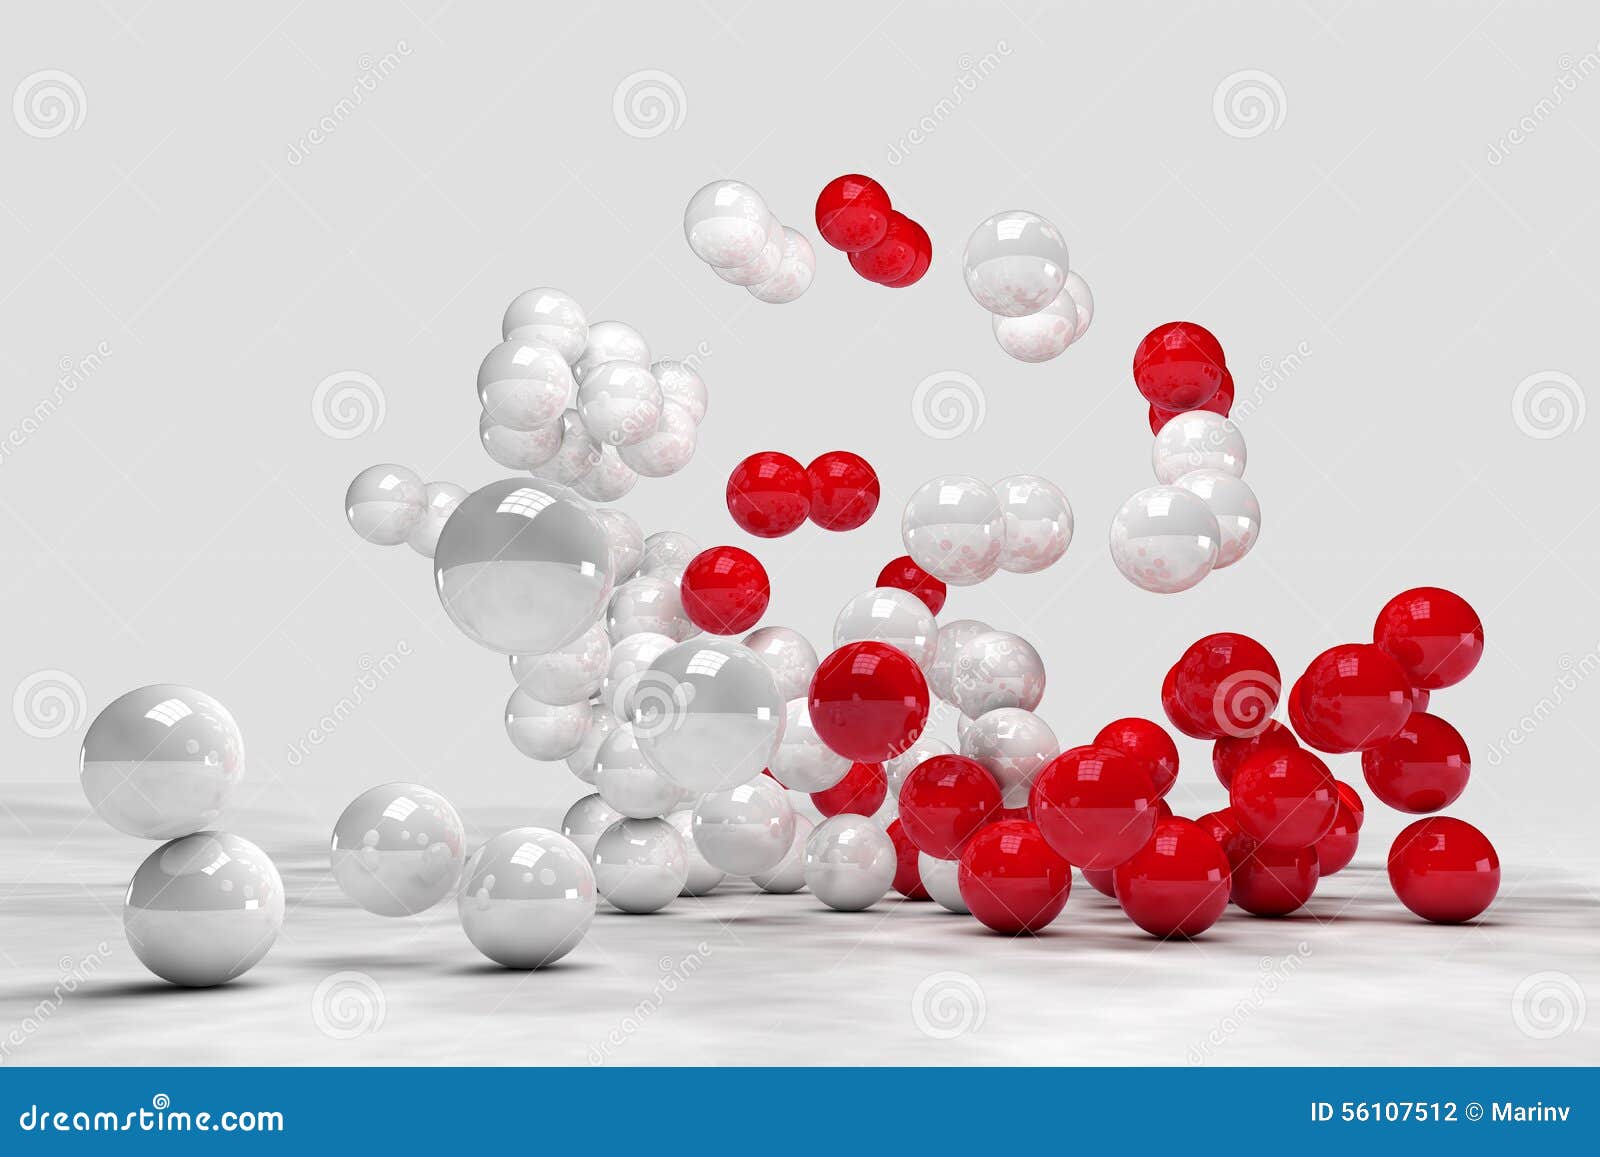 lots of white and red balls interact